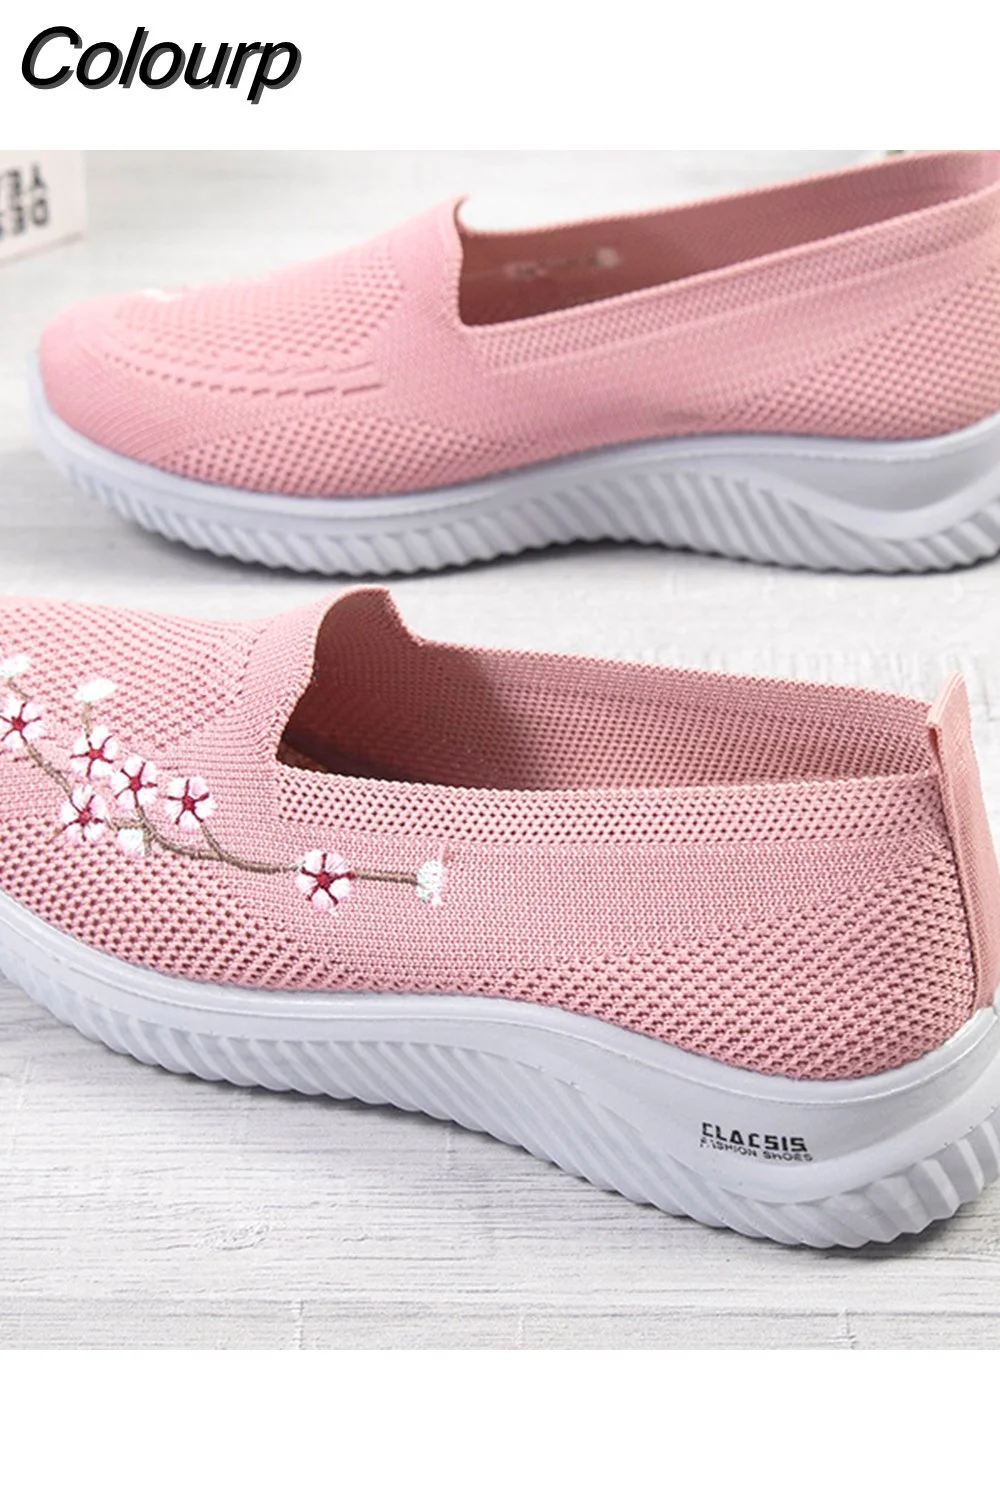 Colourp Slip-on Women Flats Shoes Fashion All-match Female Sneakers Soft Comfort Walking Shoes Lightweight Breathable